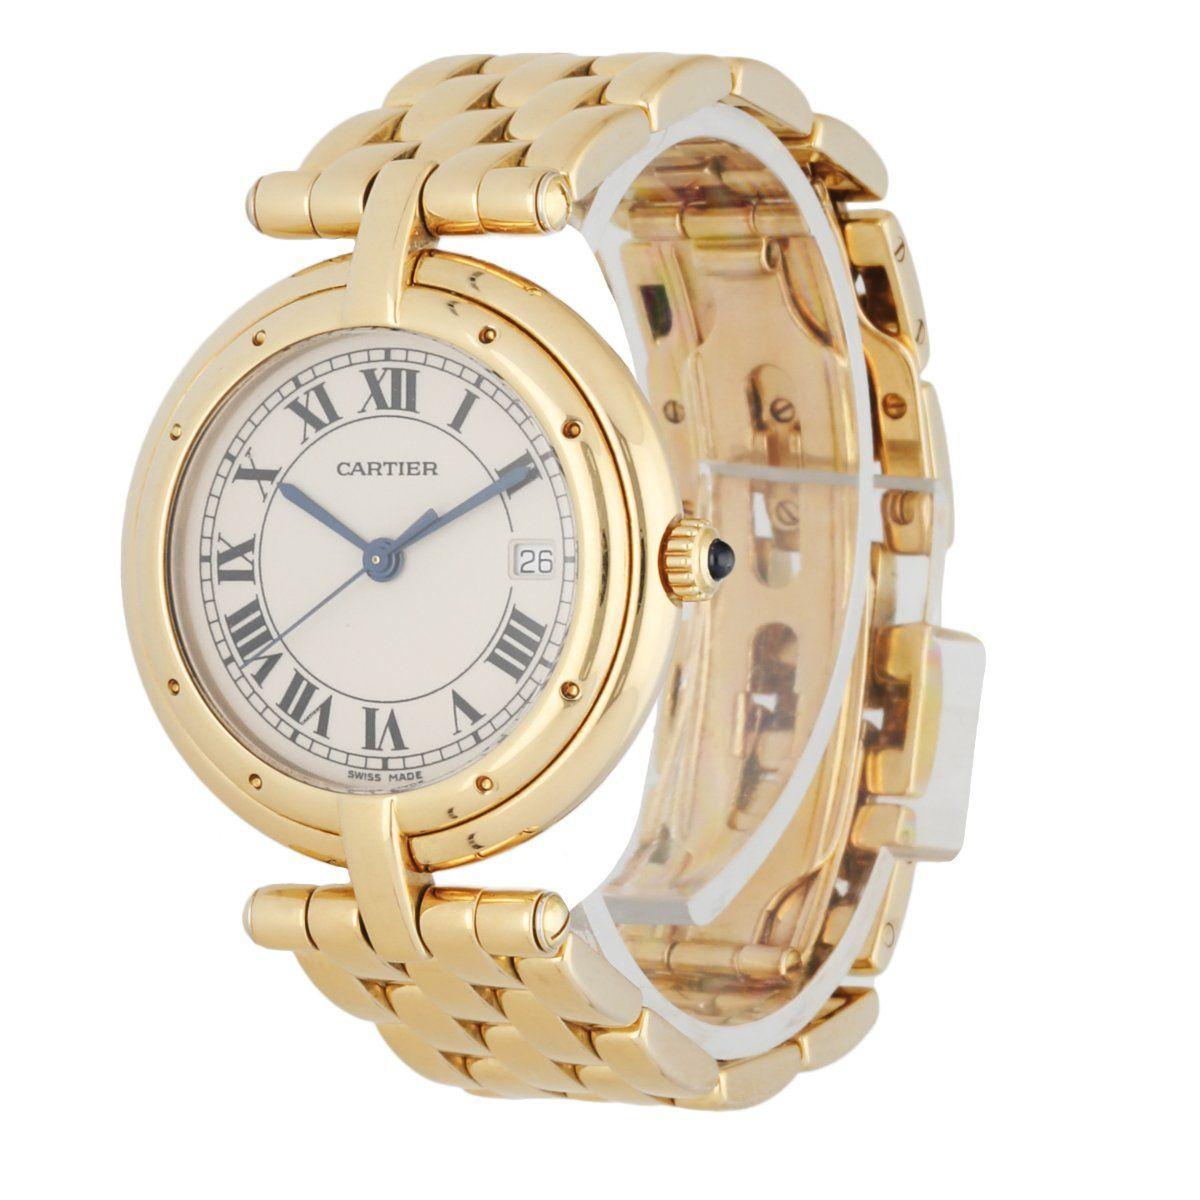 Cartier cougar Panthere Ladies Watch. 30mm 18k Yellow gold case. 18K Yellow Gold smooth bezel. Off-White dial with Blue steel hands and Roman numeral hour markers.Minute markers on the outer dial. Date display at 3 o'clock position. 18K Yellow Gold